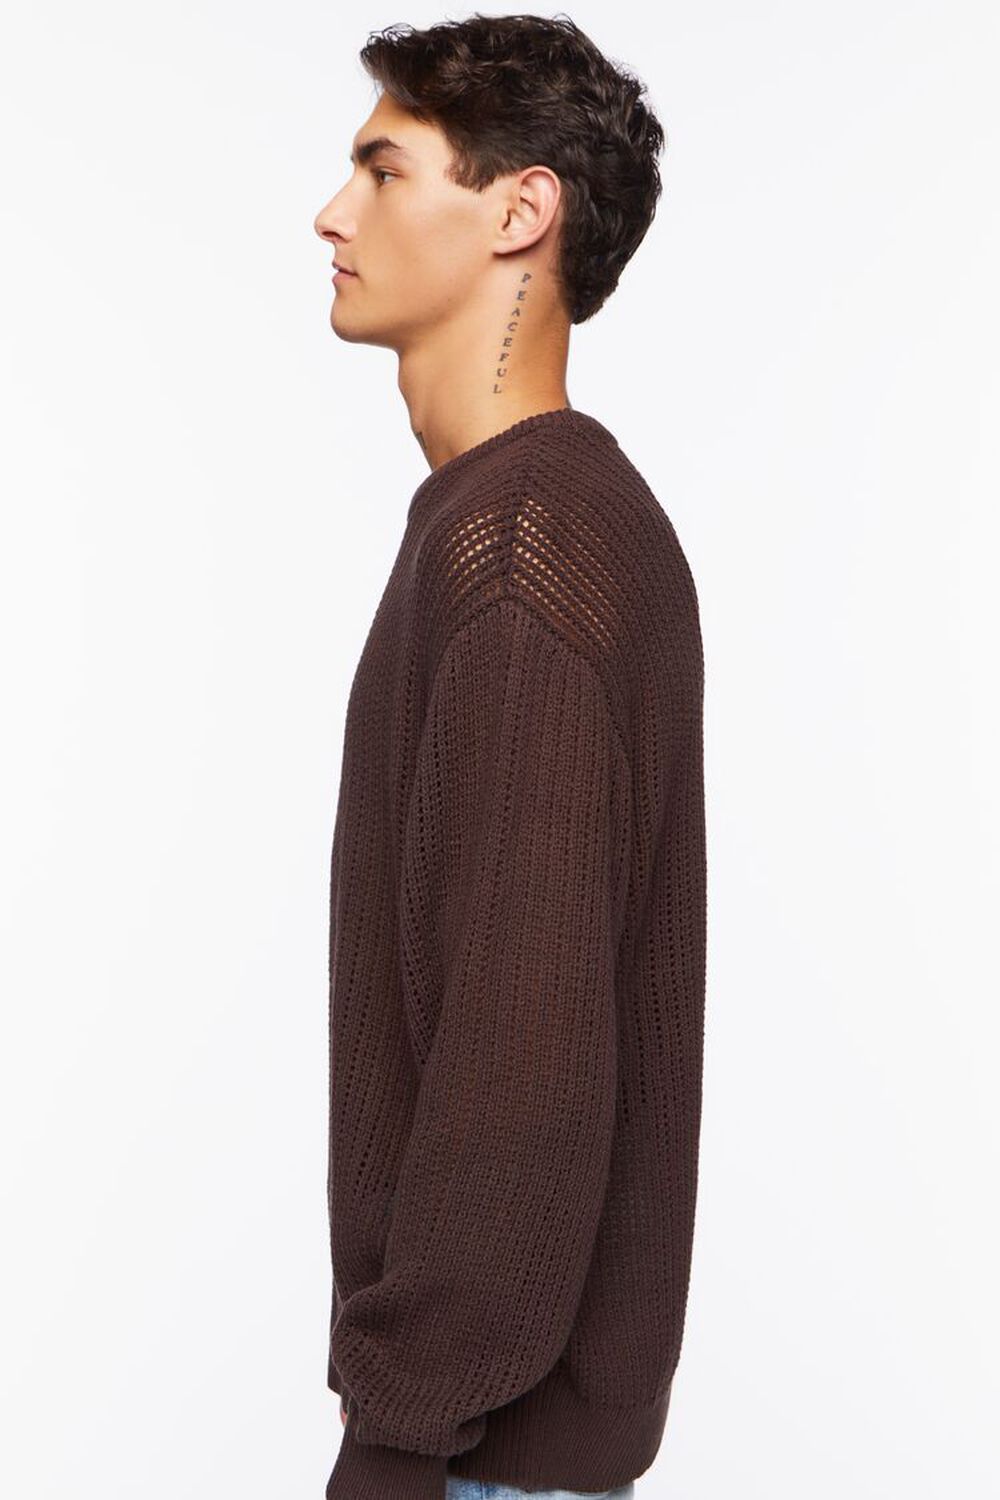 COCOA Open-Knit Crew Sweater, image 2